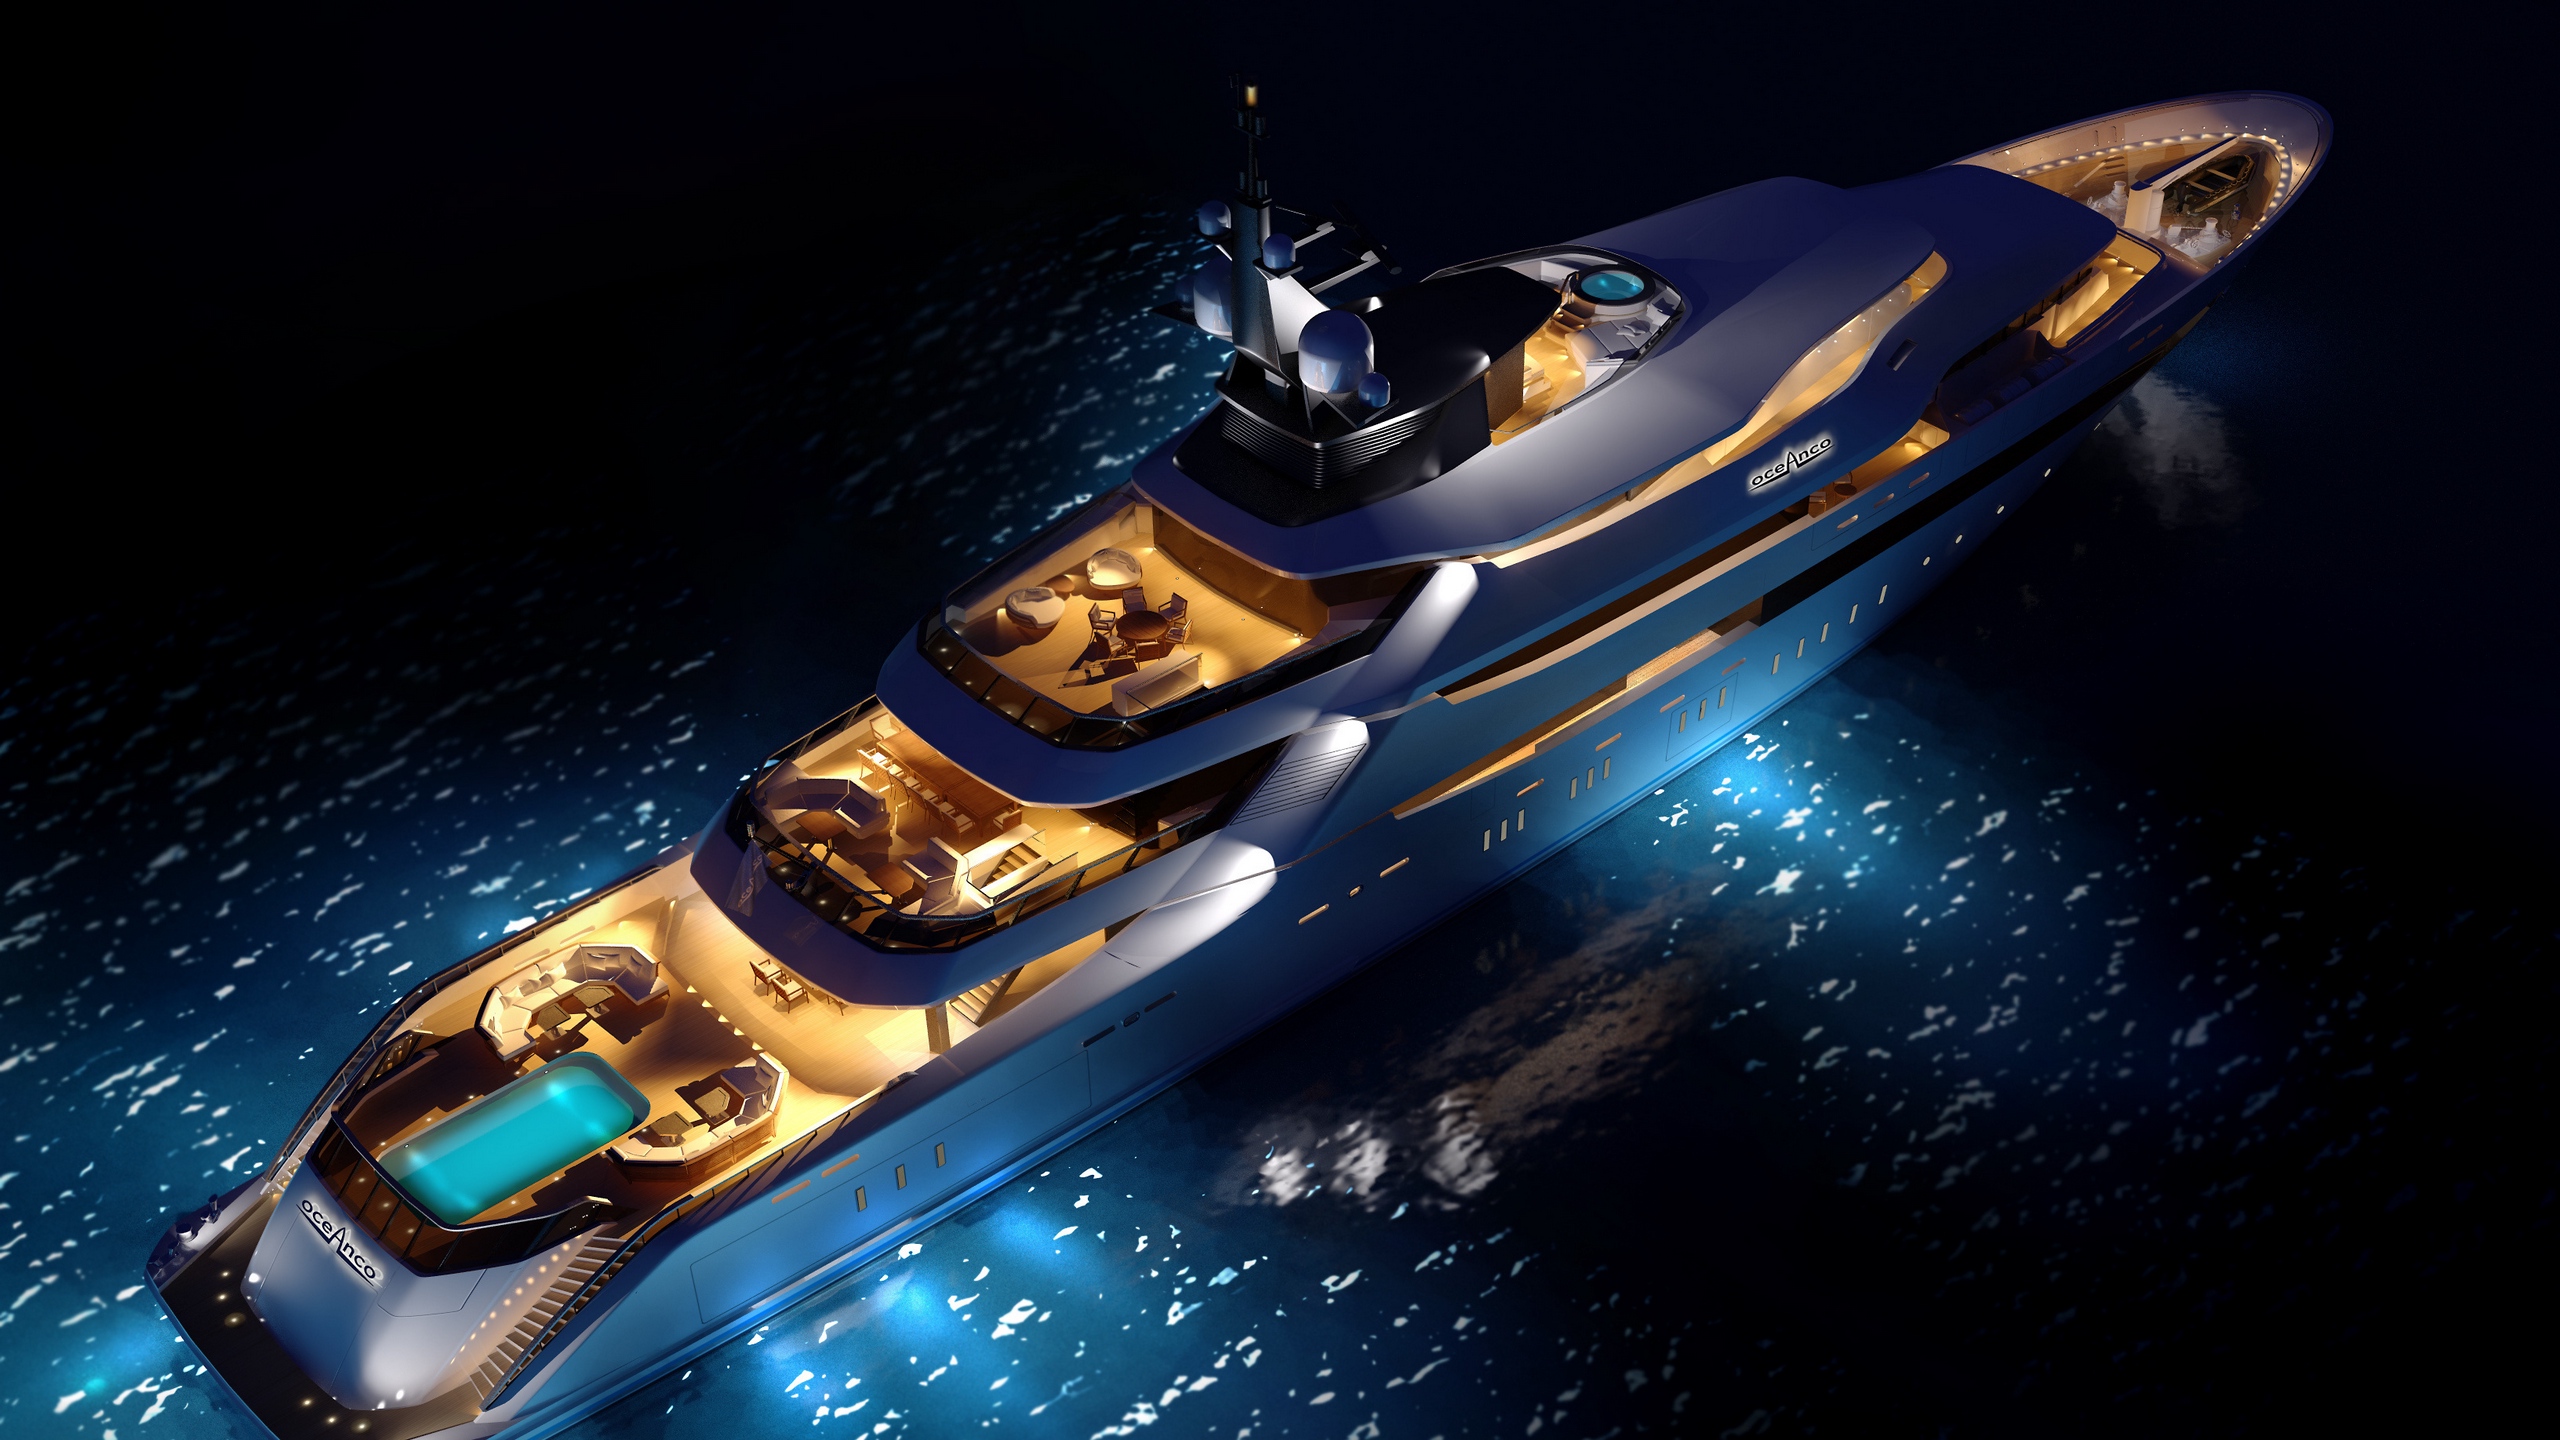 Free download Download wallpaper 2560x1440 yacht concept luxury widescreen 16 [2560x1440] for your Desktop, Mobile & Tablet. Explore Luxury Yachts Wallpaper. Luxury Yachts Wallpaper, Yachts Wallpaper, Luxury Wallpaper